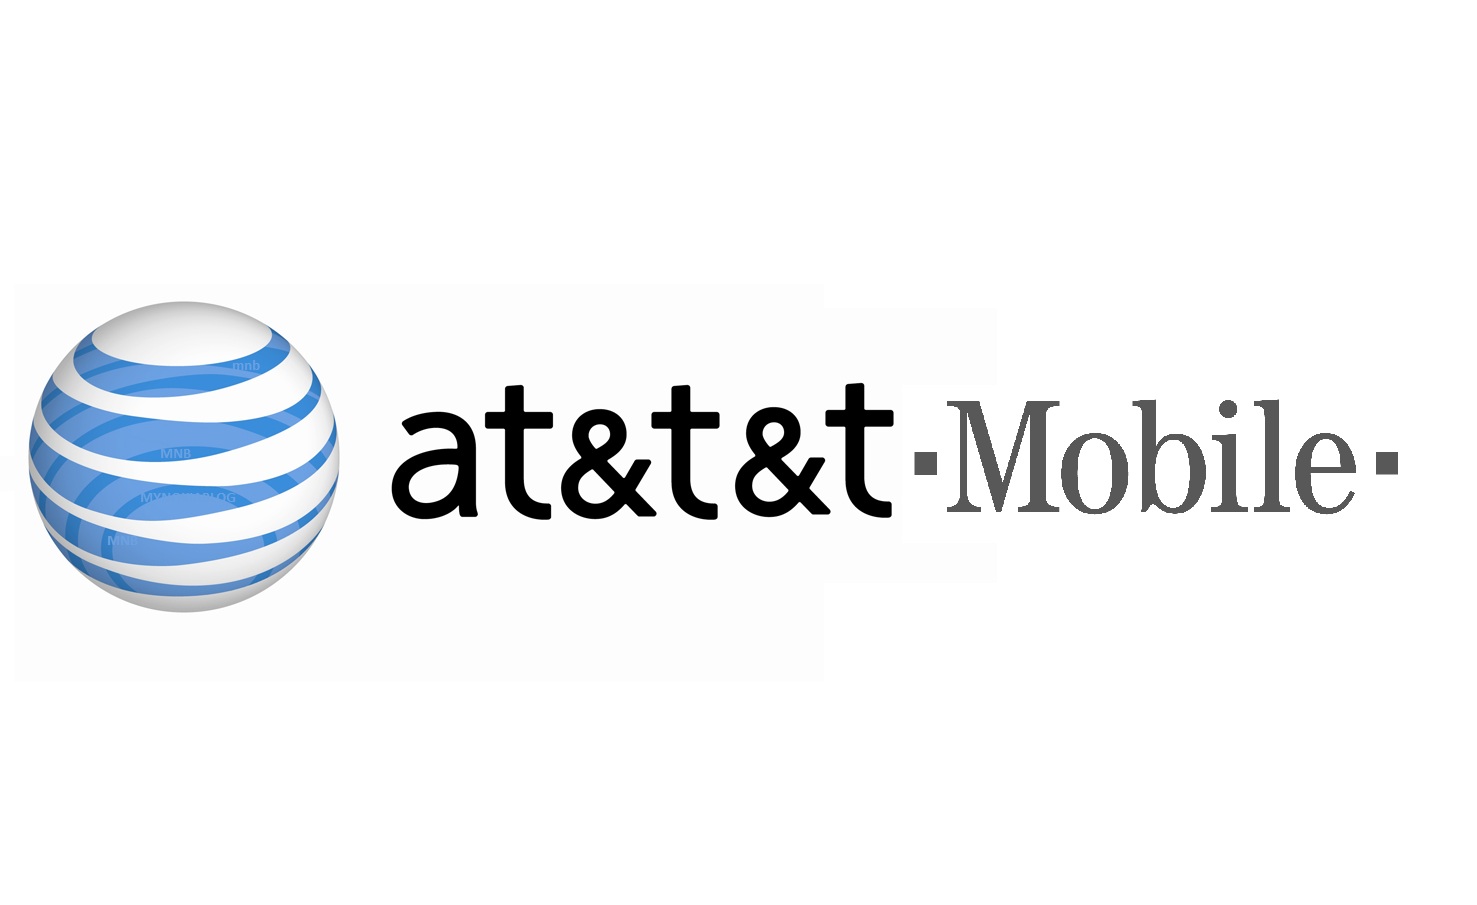 AT&T's Failed Acquisition of T-Mobile